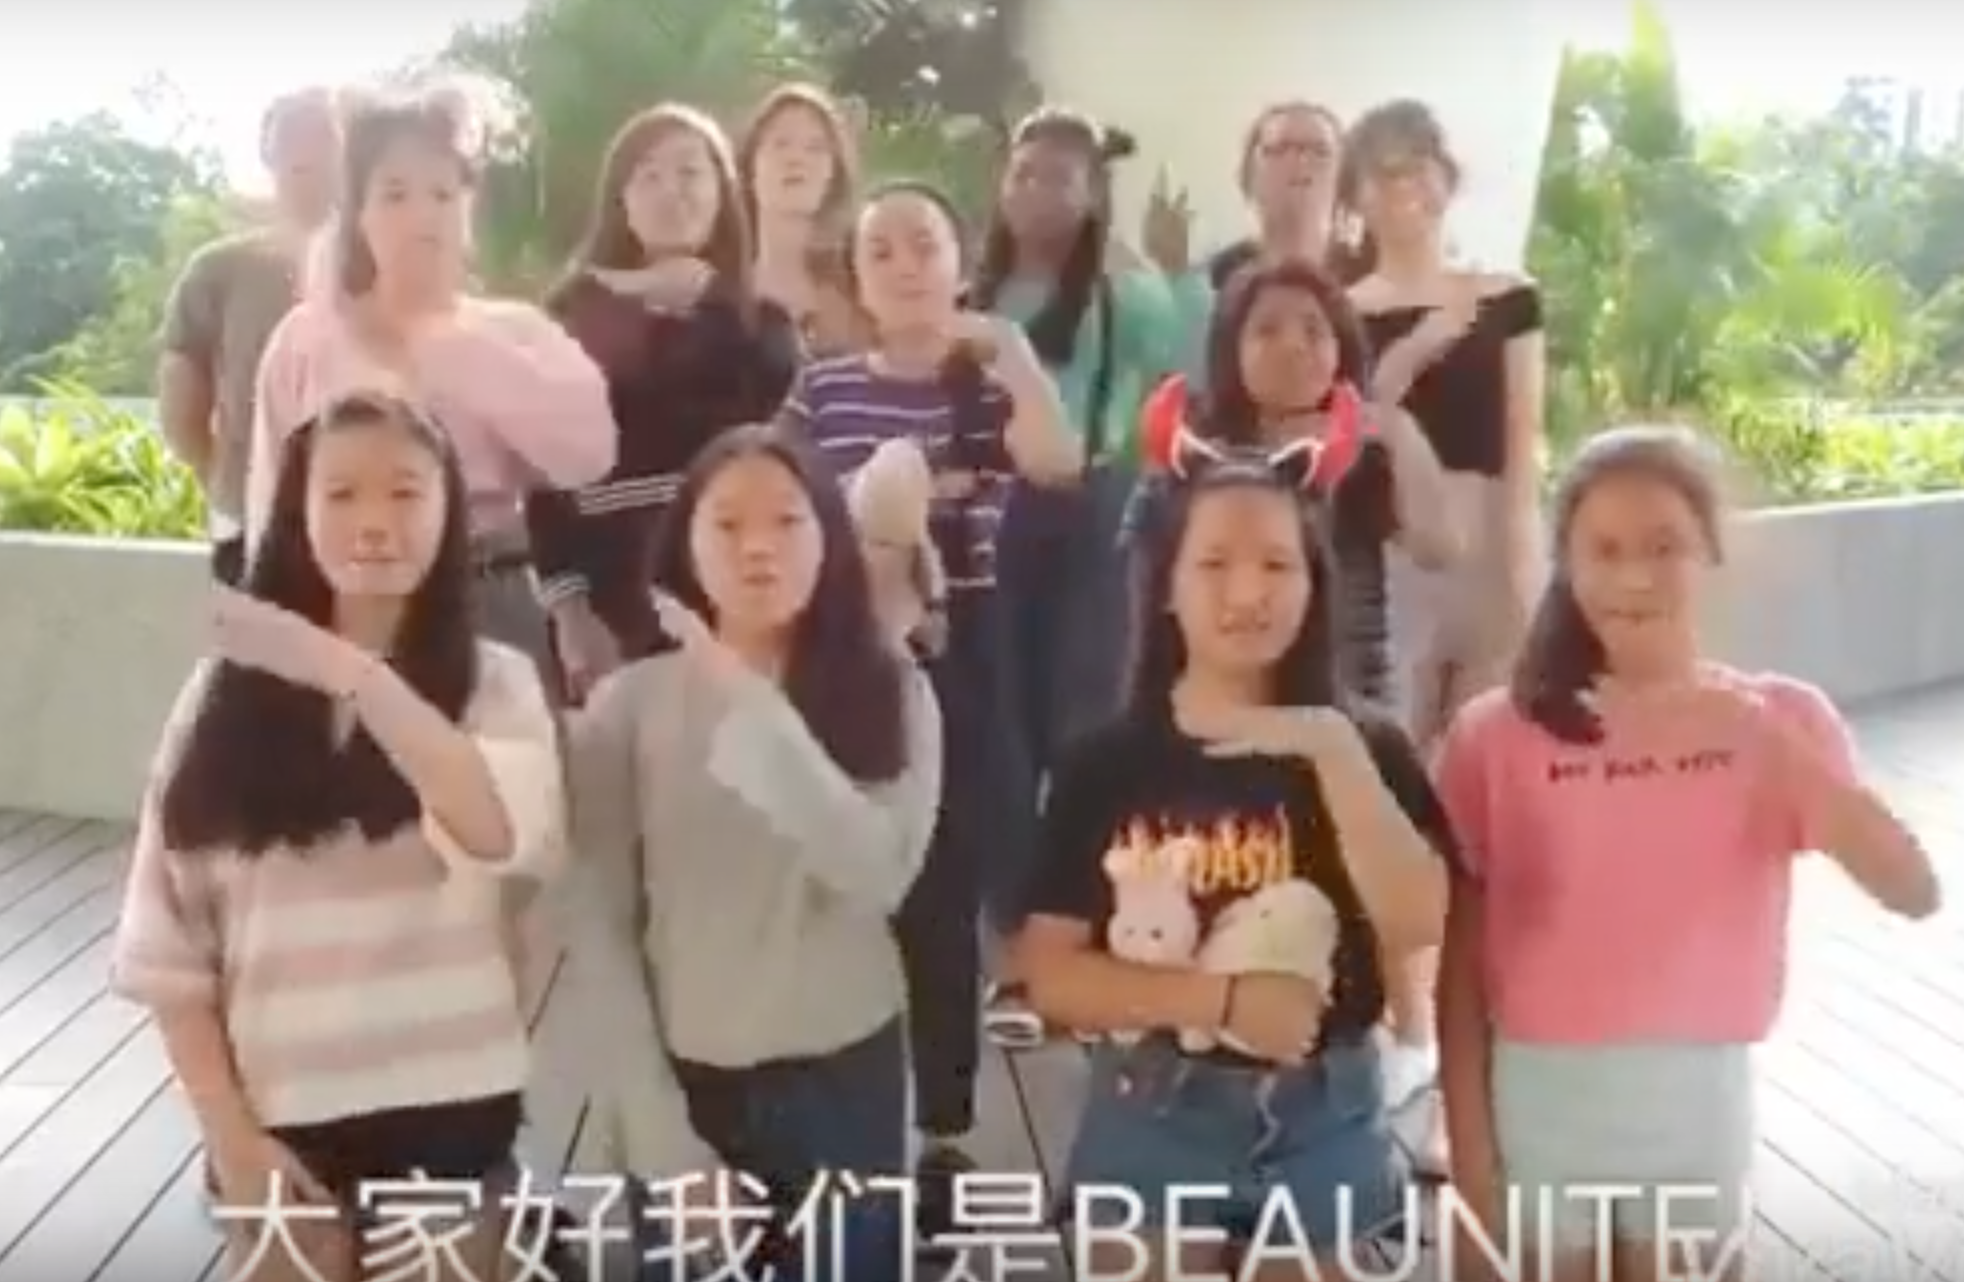 S Porean Teen Girls Form K Pop Group Called Beaunite Annoys K Pop Fans Mothership Sg News From Singapore Asia And Around The World